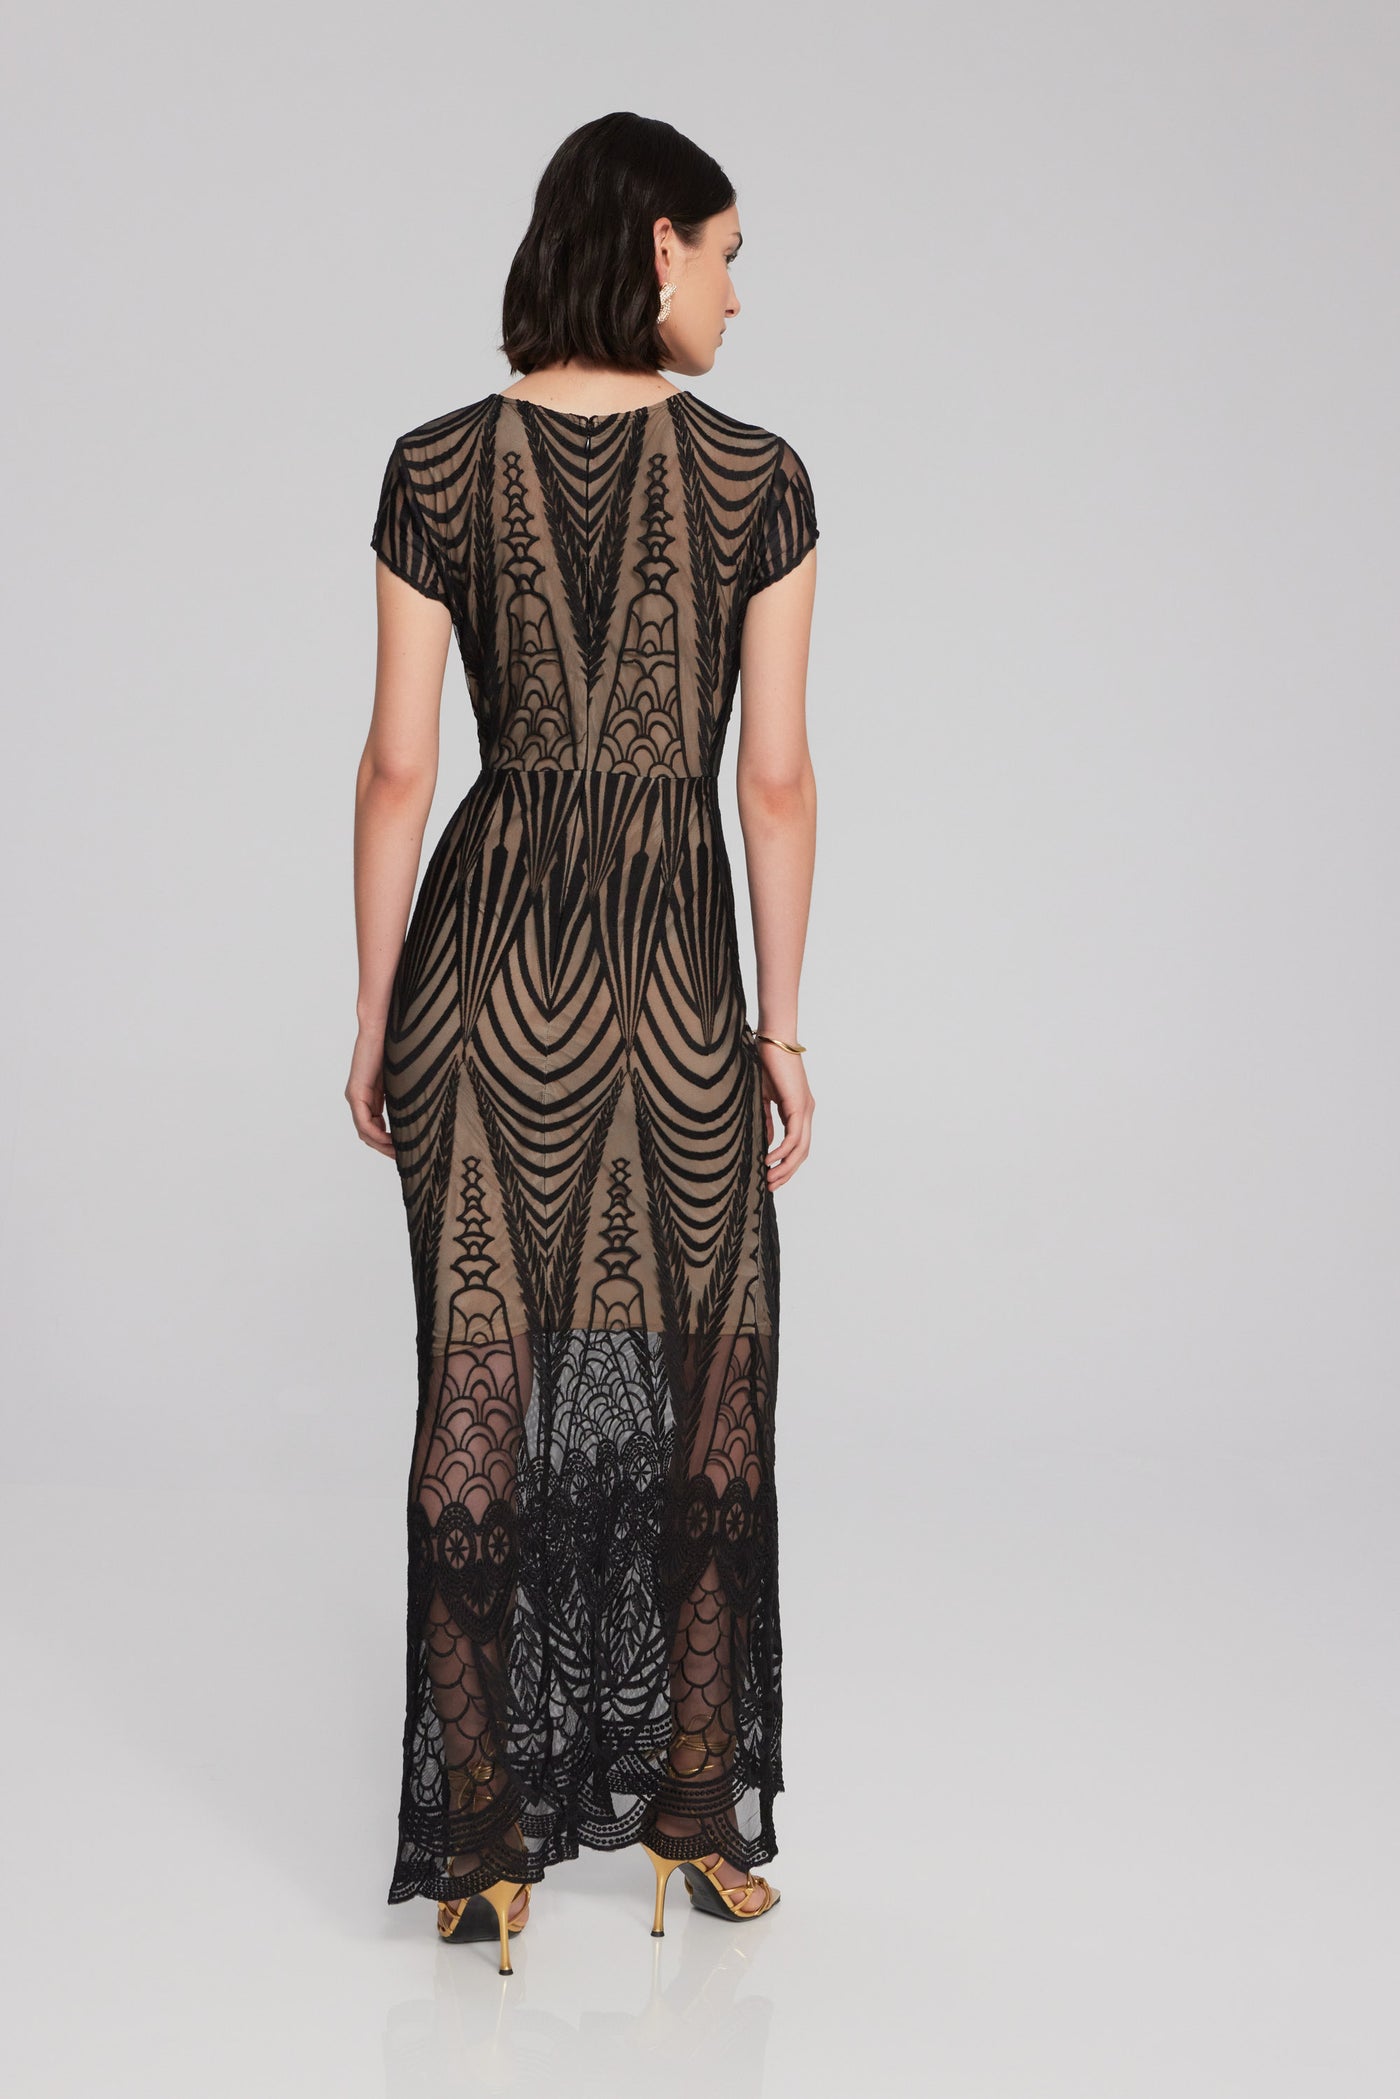 Joseph Ribkoff Embroidered Lace Trumpet Gown 